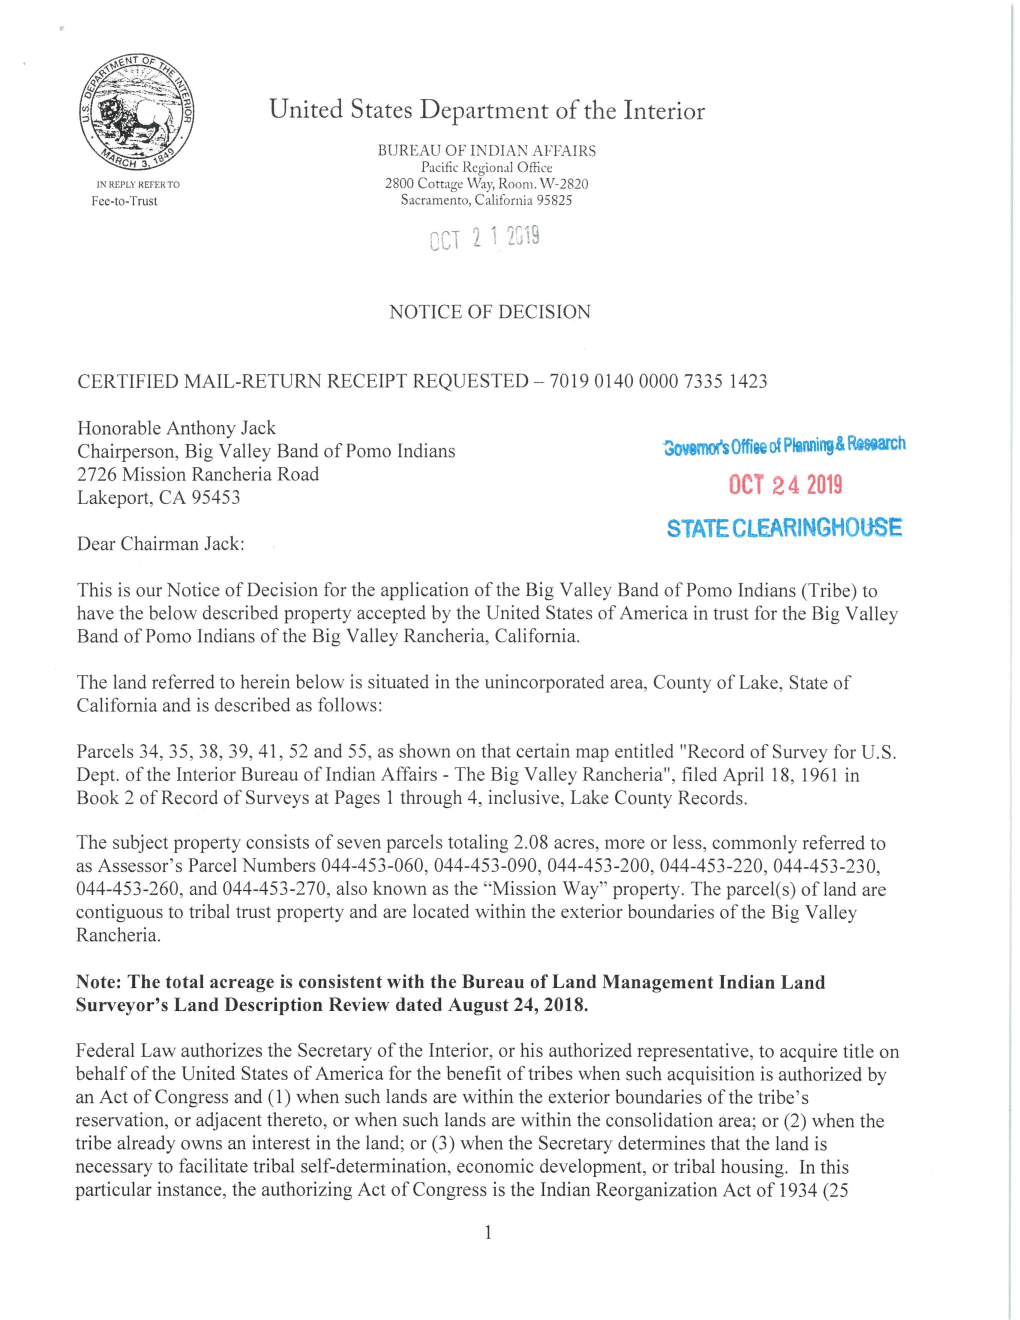 OCT 24 2019 STATE CLEARINGHOUSE Dear Chairman Jack